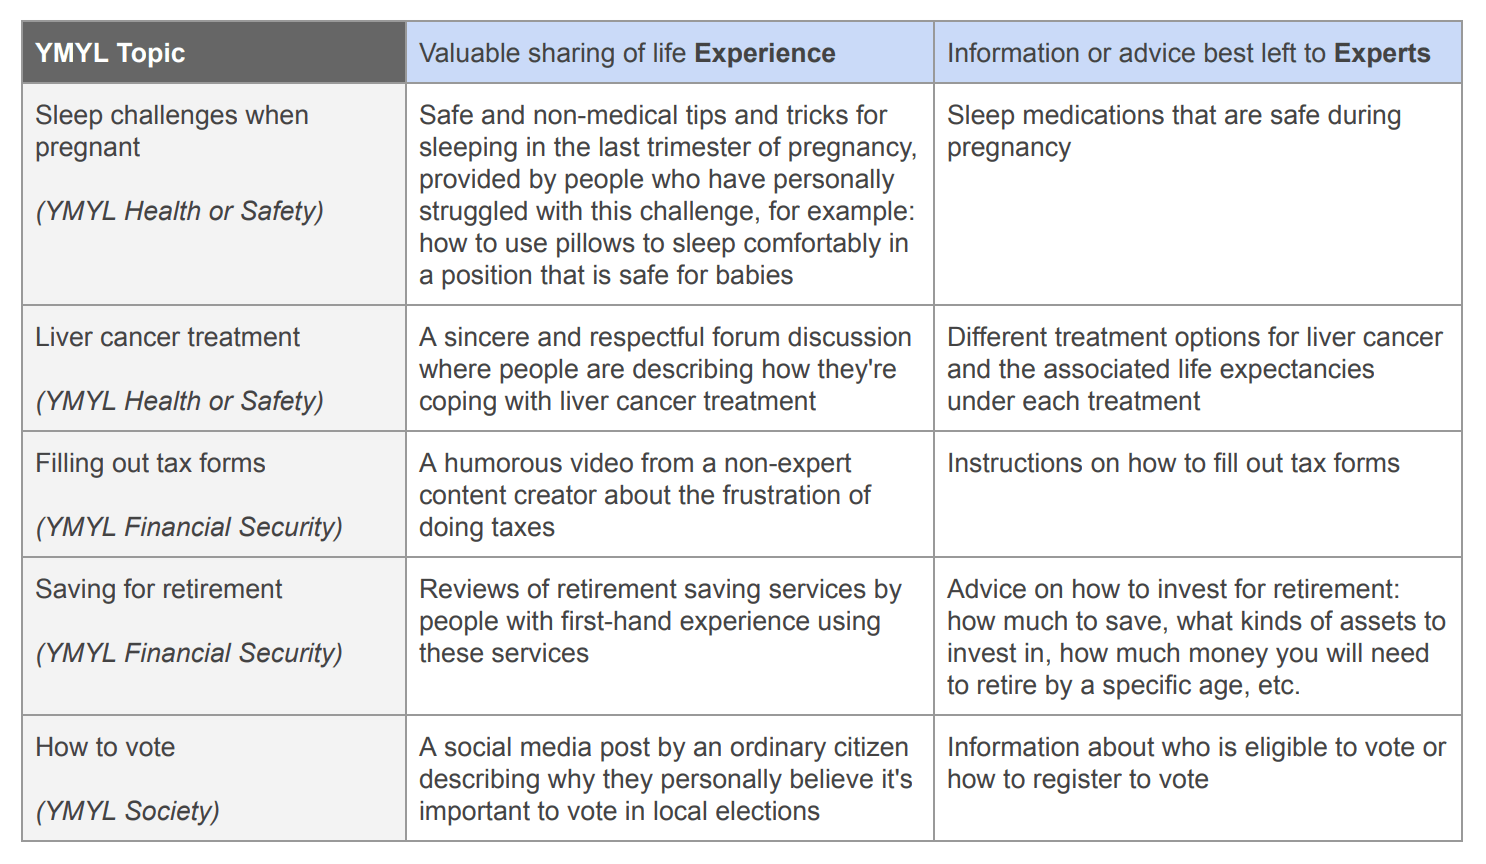 The difference between experience and expertise for YMYL subjects